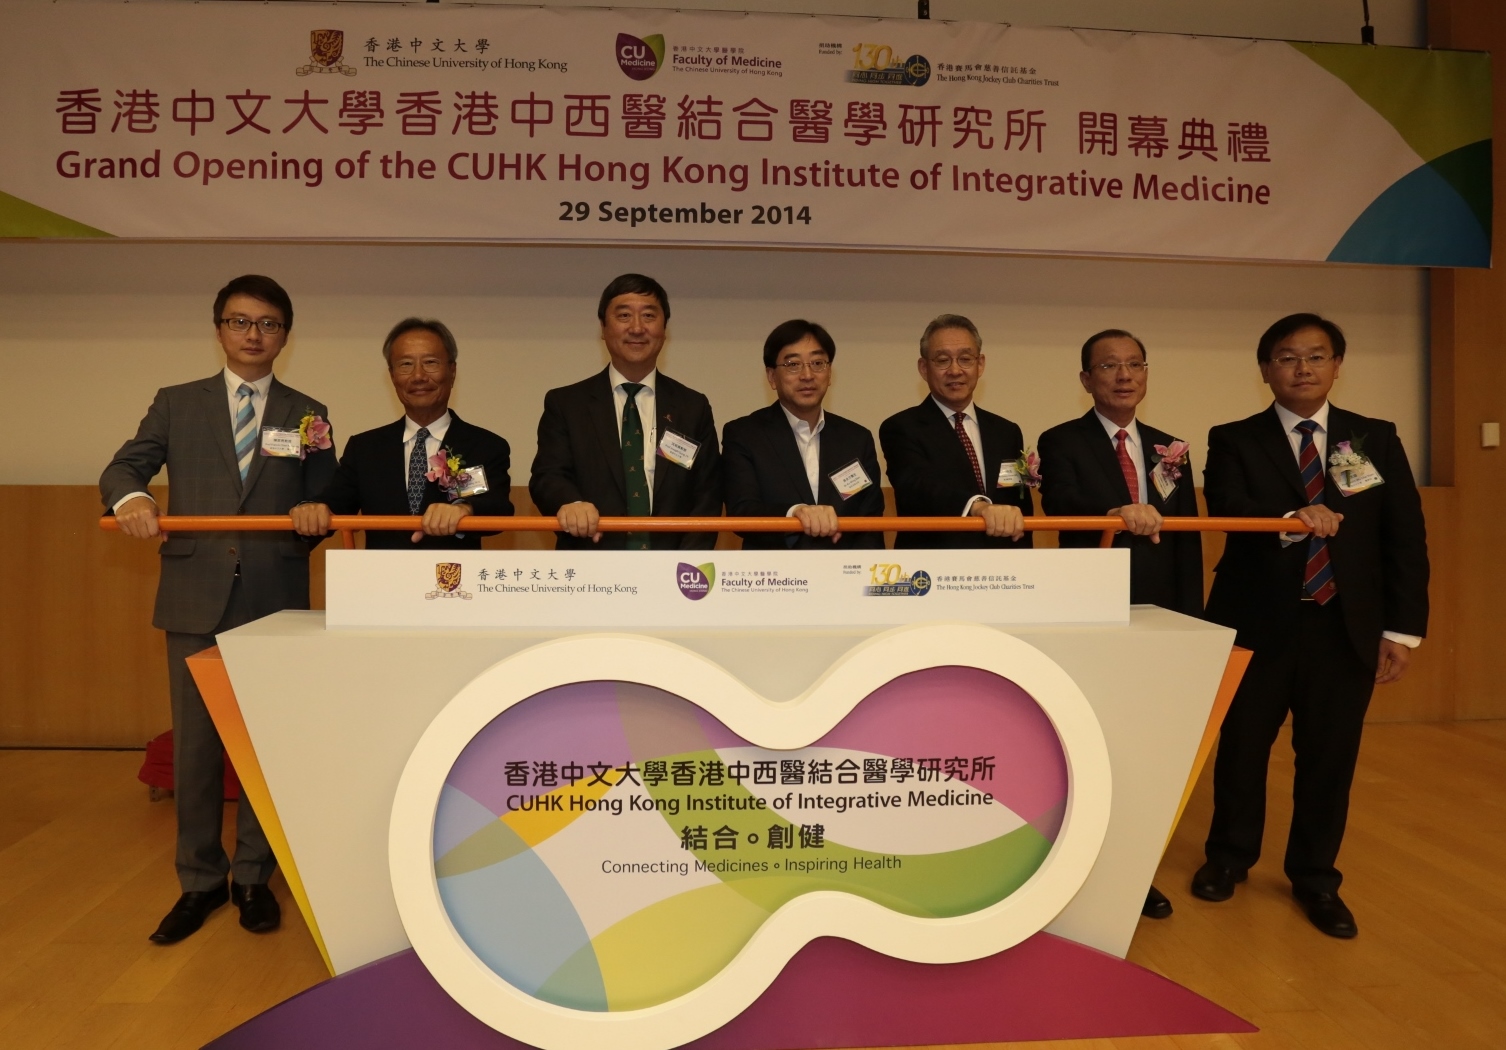 Prof Francis KL Chan, Dean of the Faculty of Medicine, CUHK; Dr Edgar WK Cheng, Chairman of the Lanson Foundation